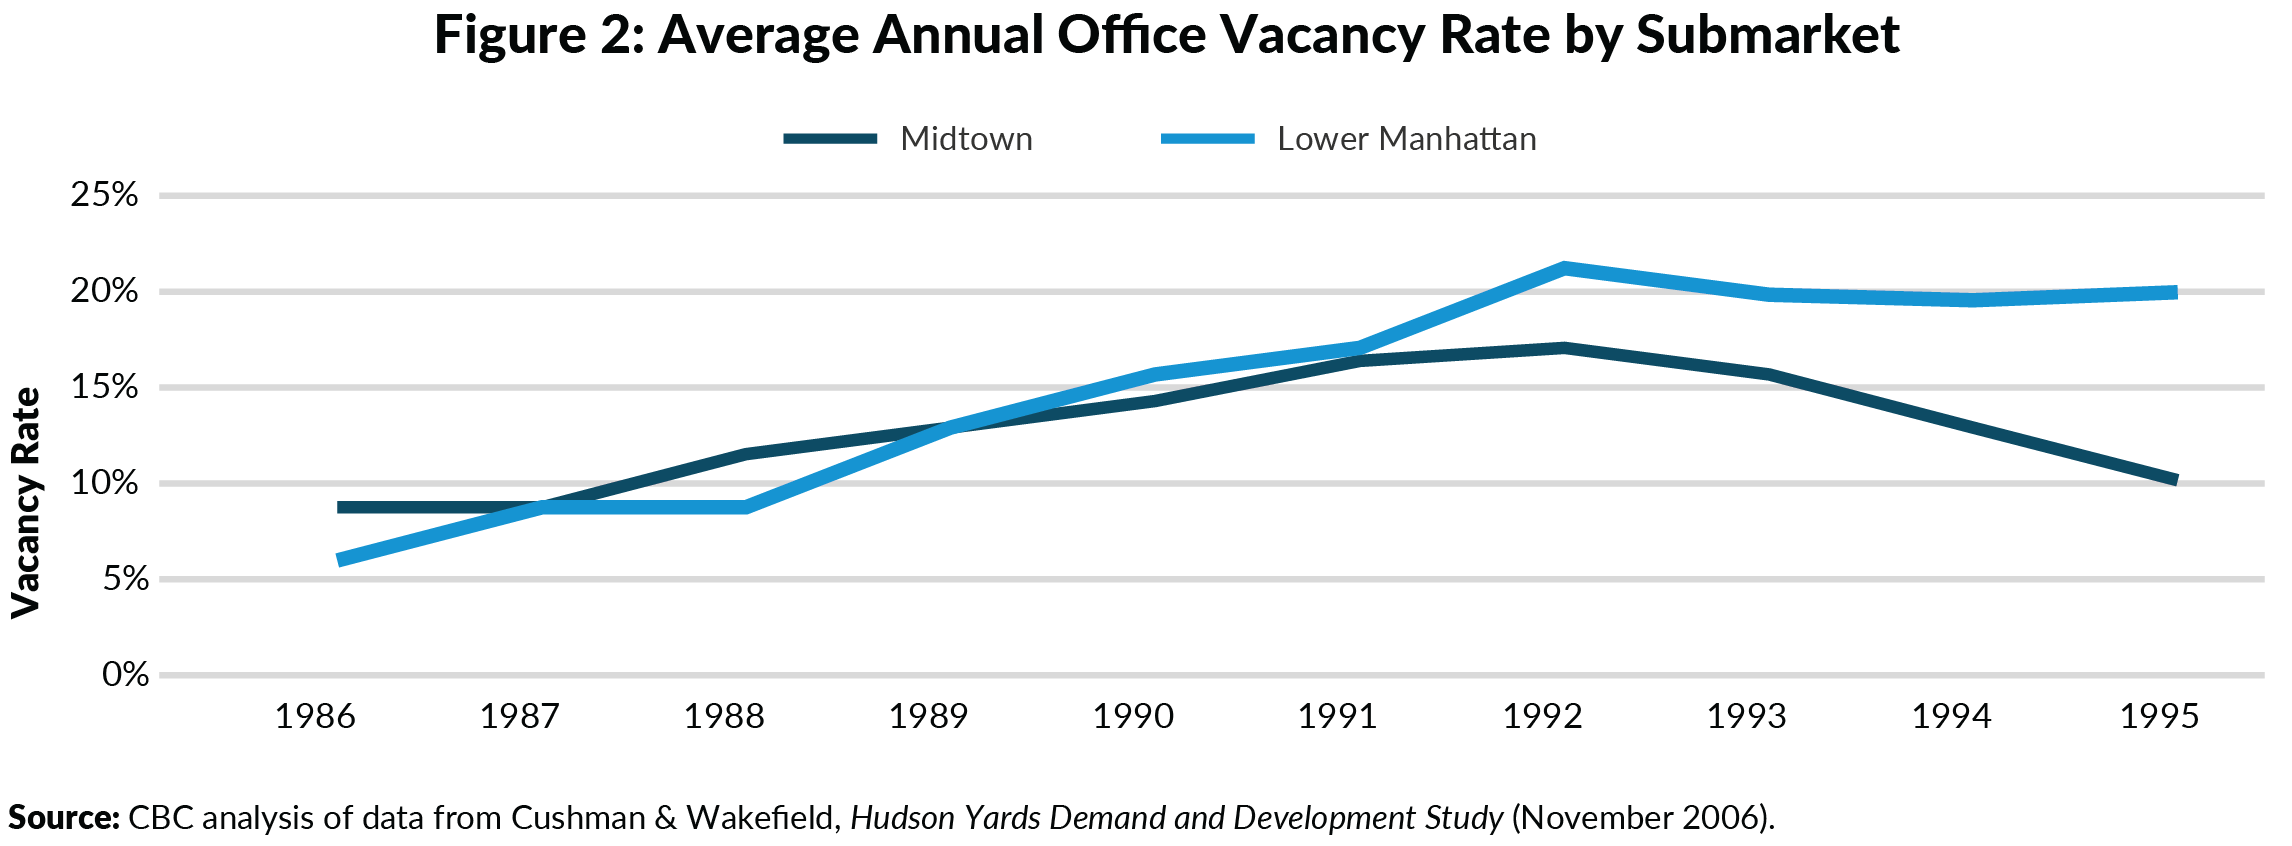 Figure 2. Average Annual Office Vacancy Rate by Submarket